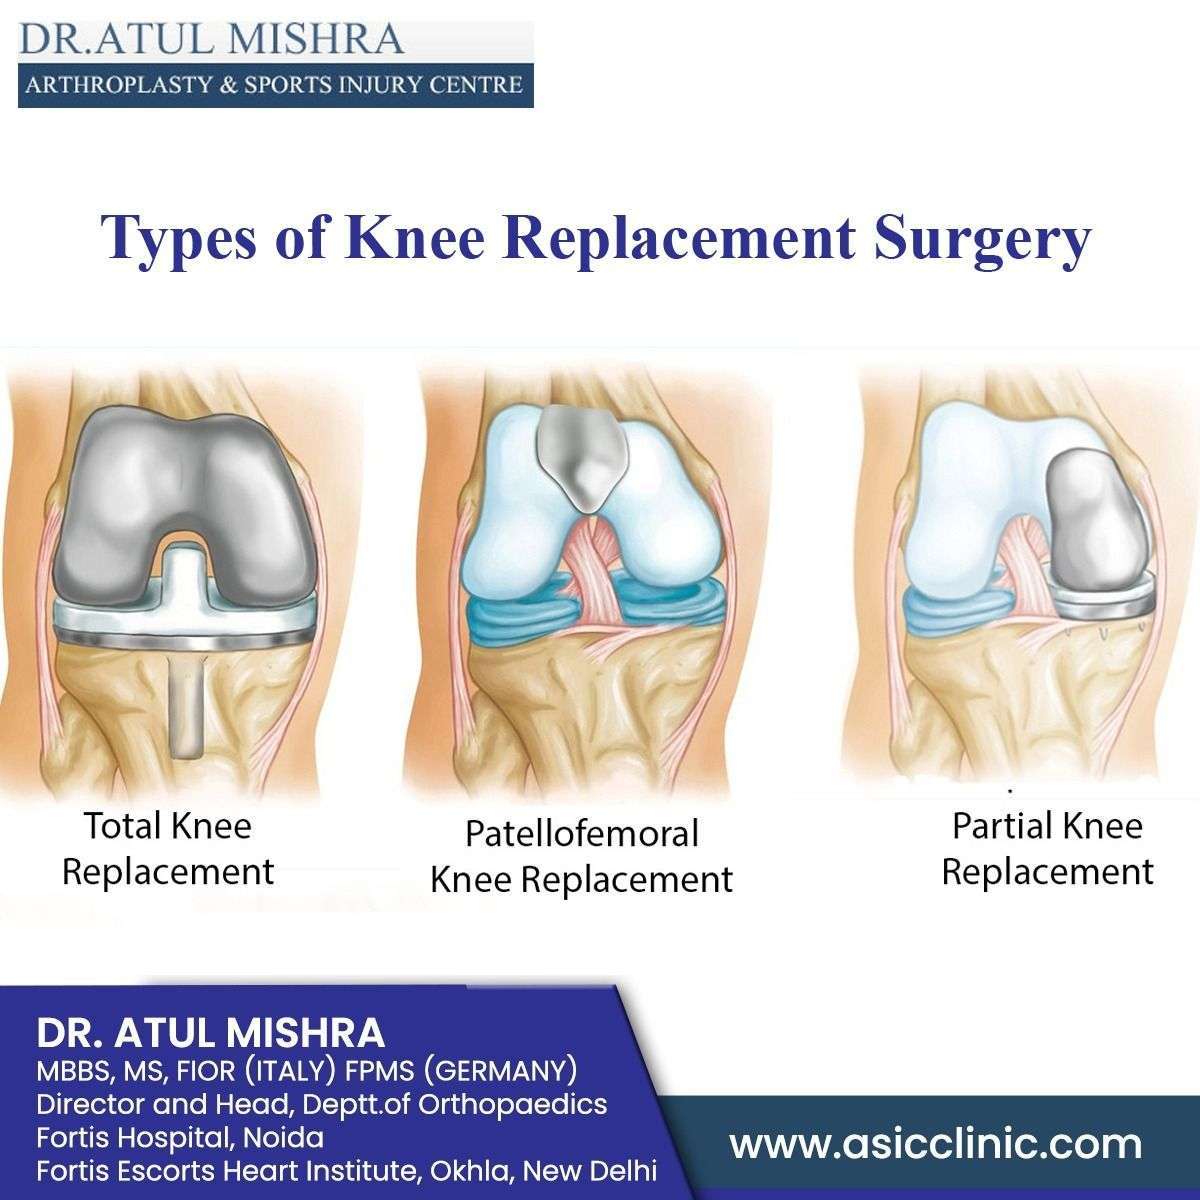 Types of Knee Replacement Surgery in 2020